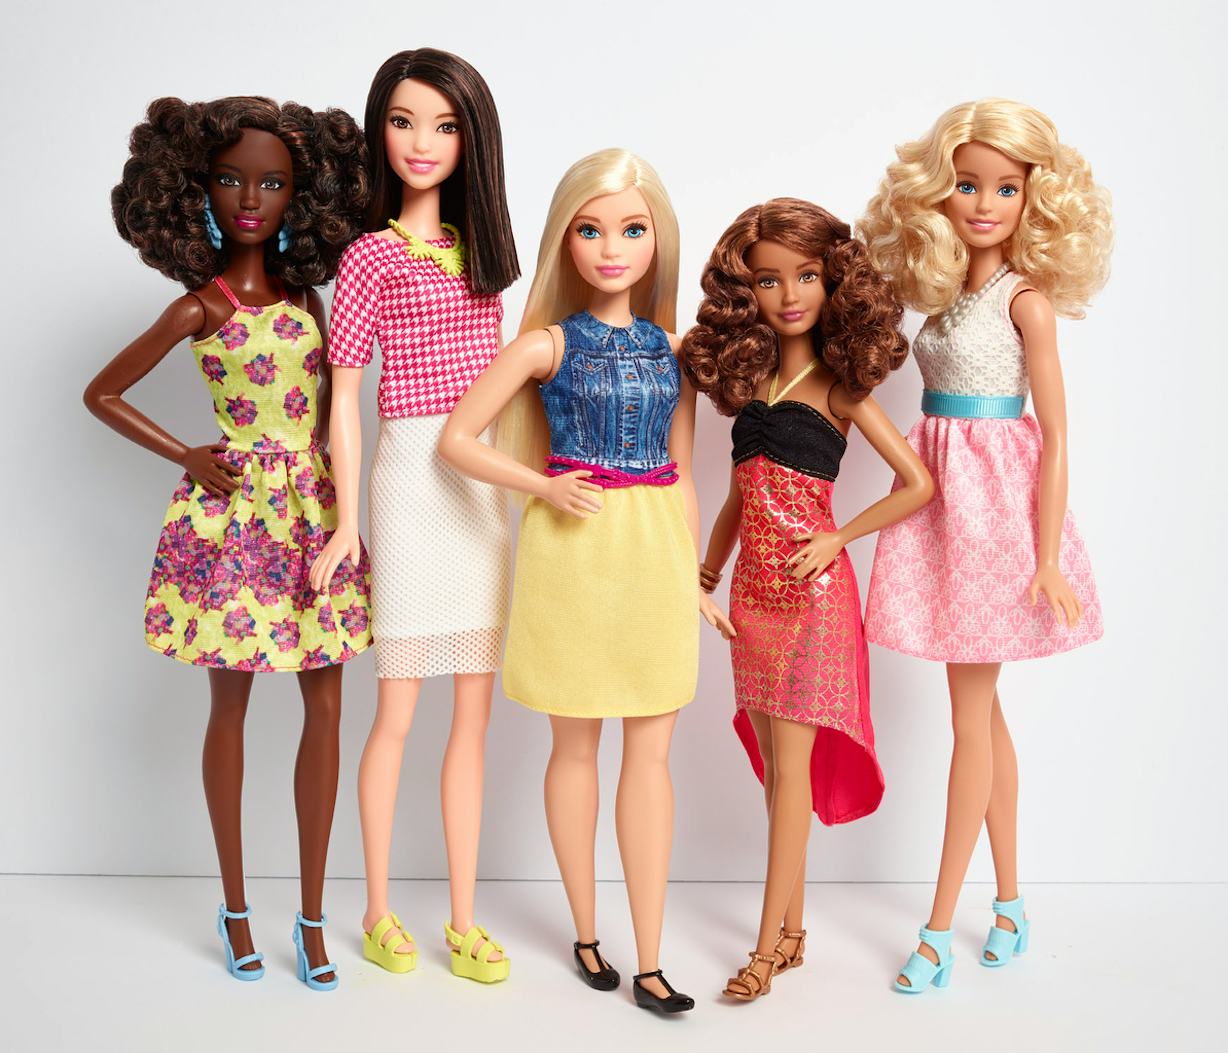 This Barbie Documentary On Hulu Will Make You View The Controversial ...